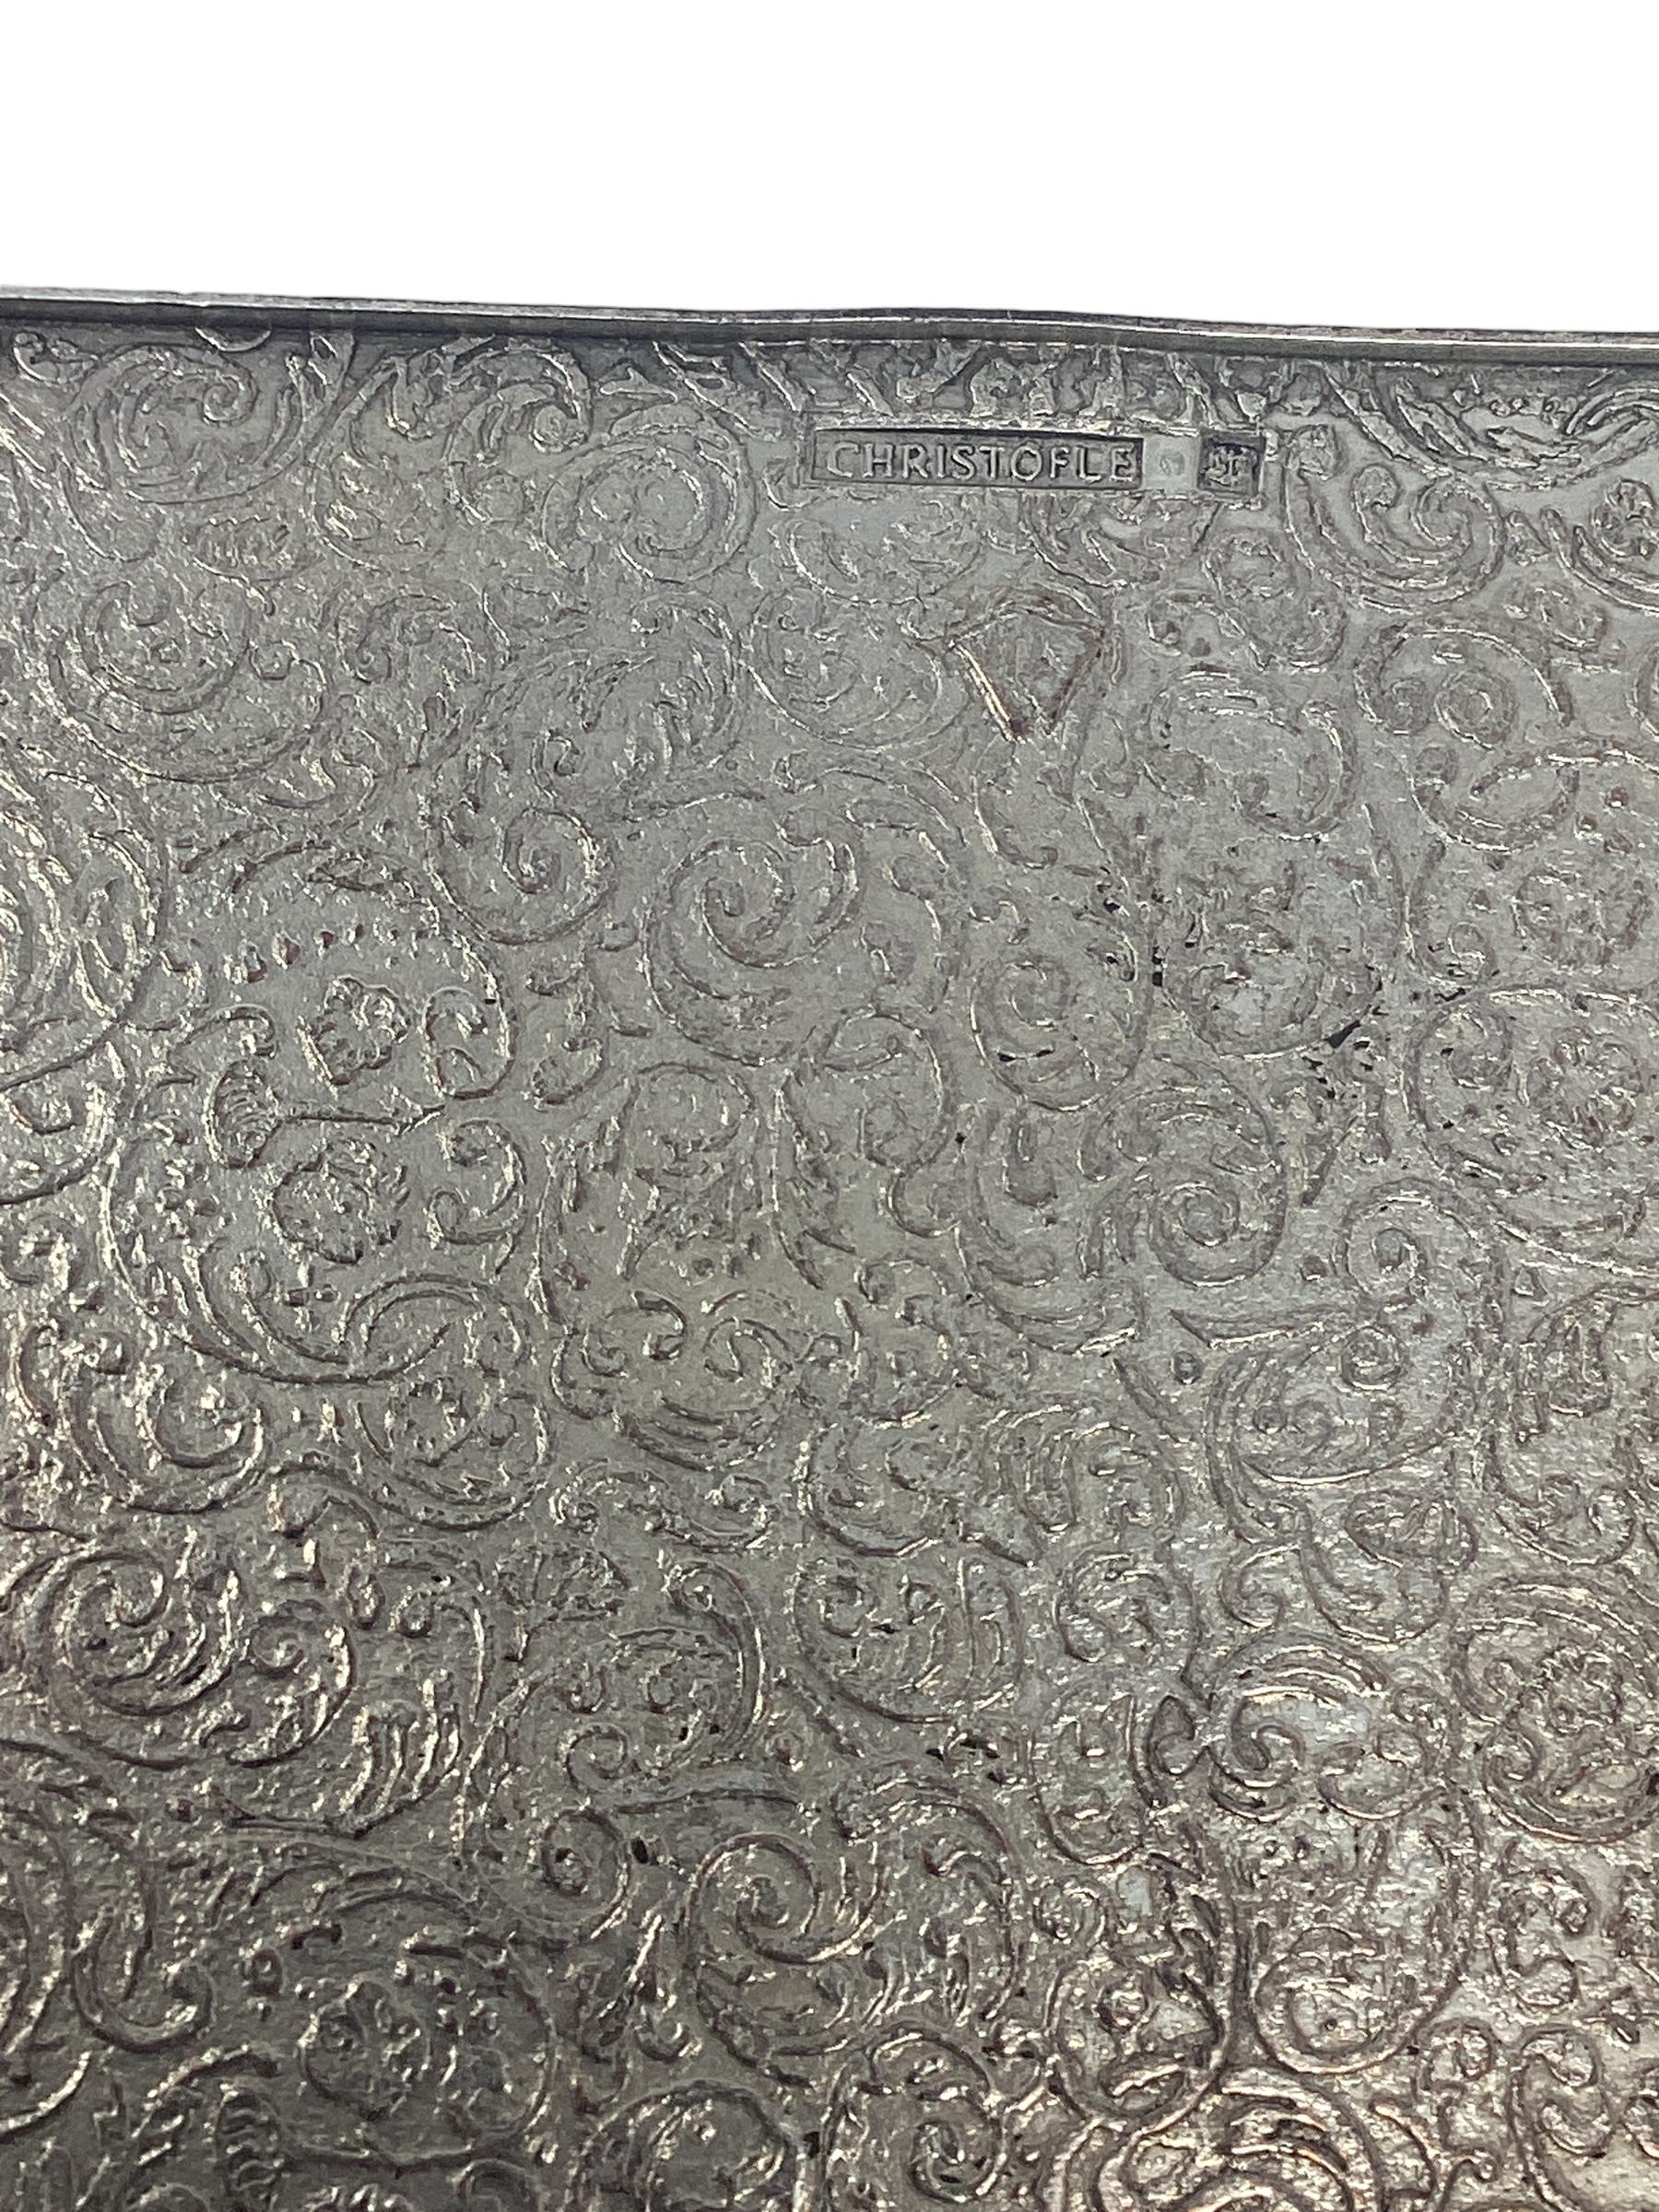 Signed Vintage Christofle Silver Plated Decorative Box. Nicely cast with beautiful design. This would have held cigarettes or trinkets. In very good vintage condition.